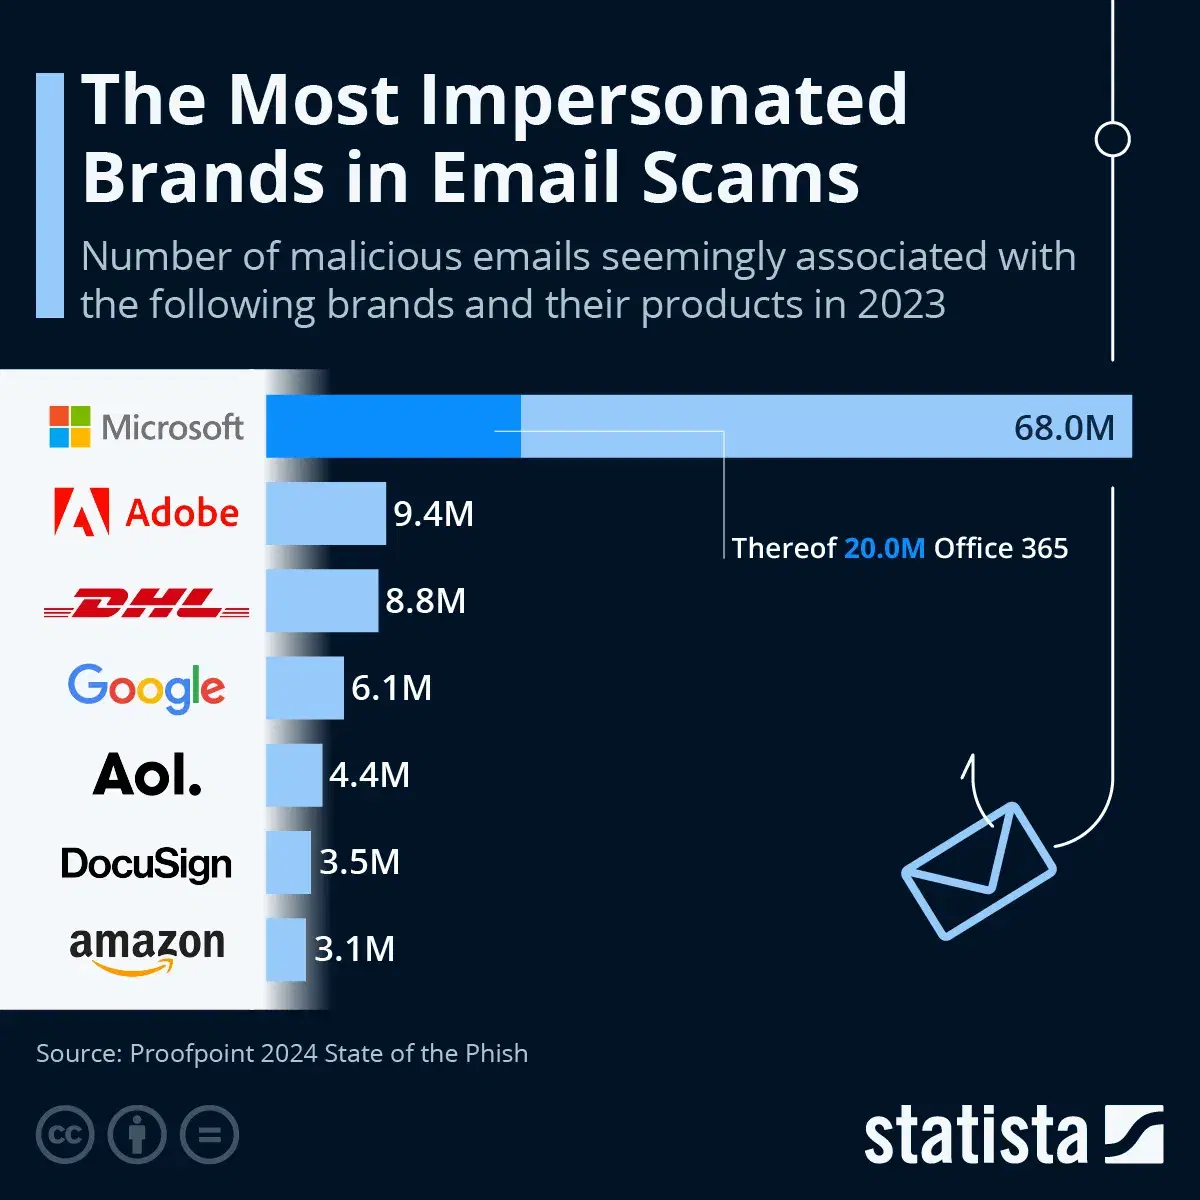 The Most Impersonated Brands in Email Scams